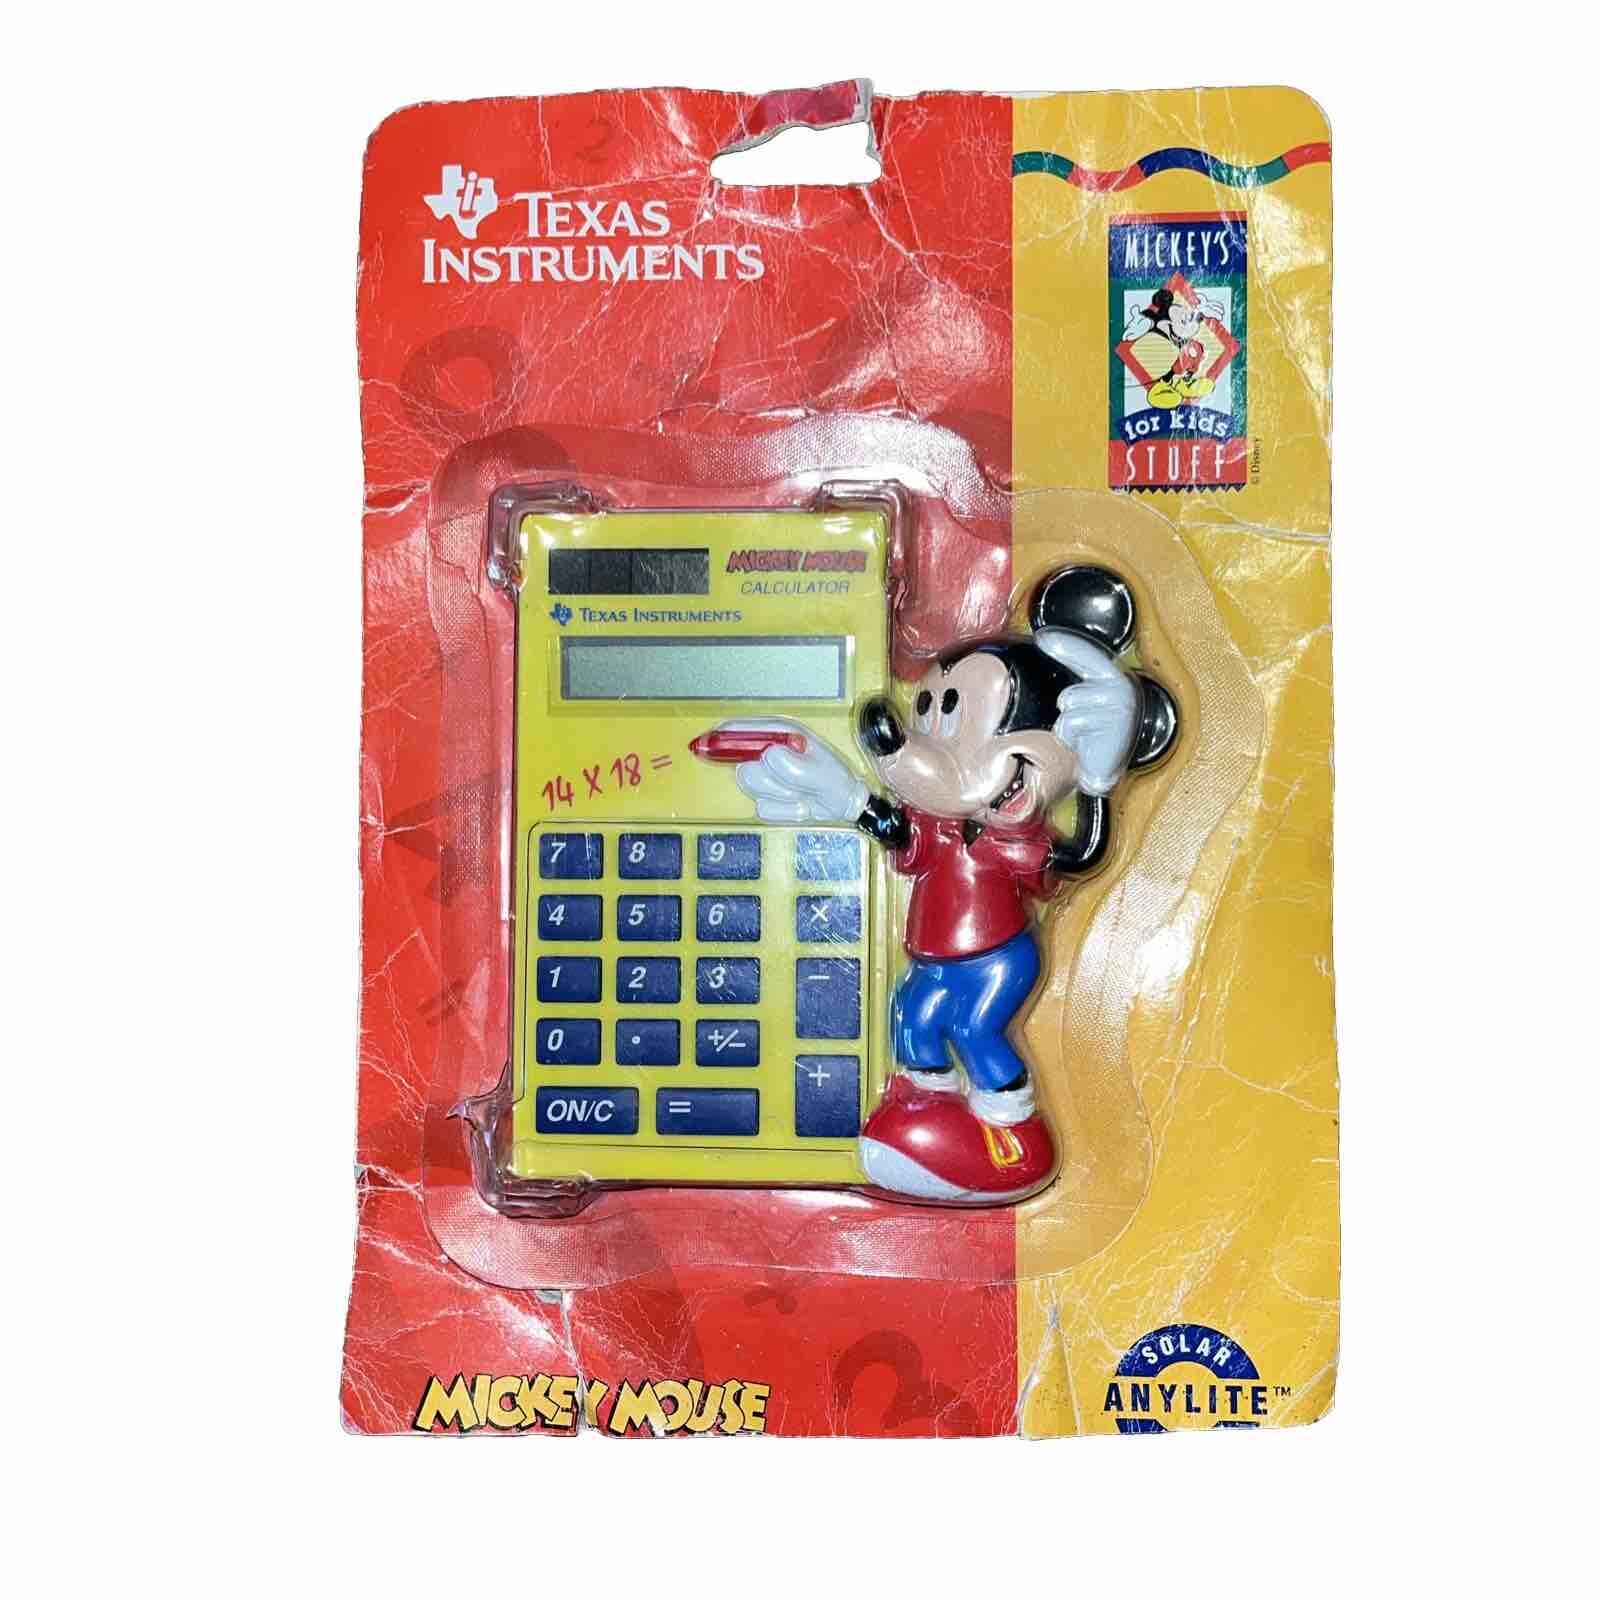 NEW Vintage Texas Instruments MICKEY MOUSE Math Adventure Kids Calculator 1993